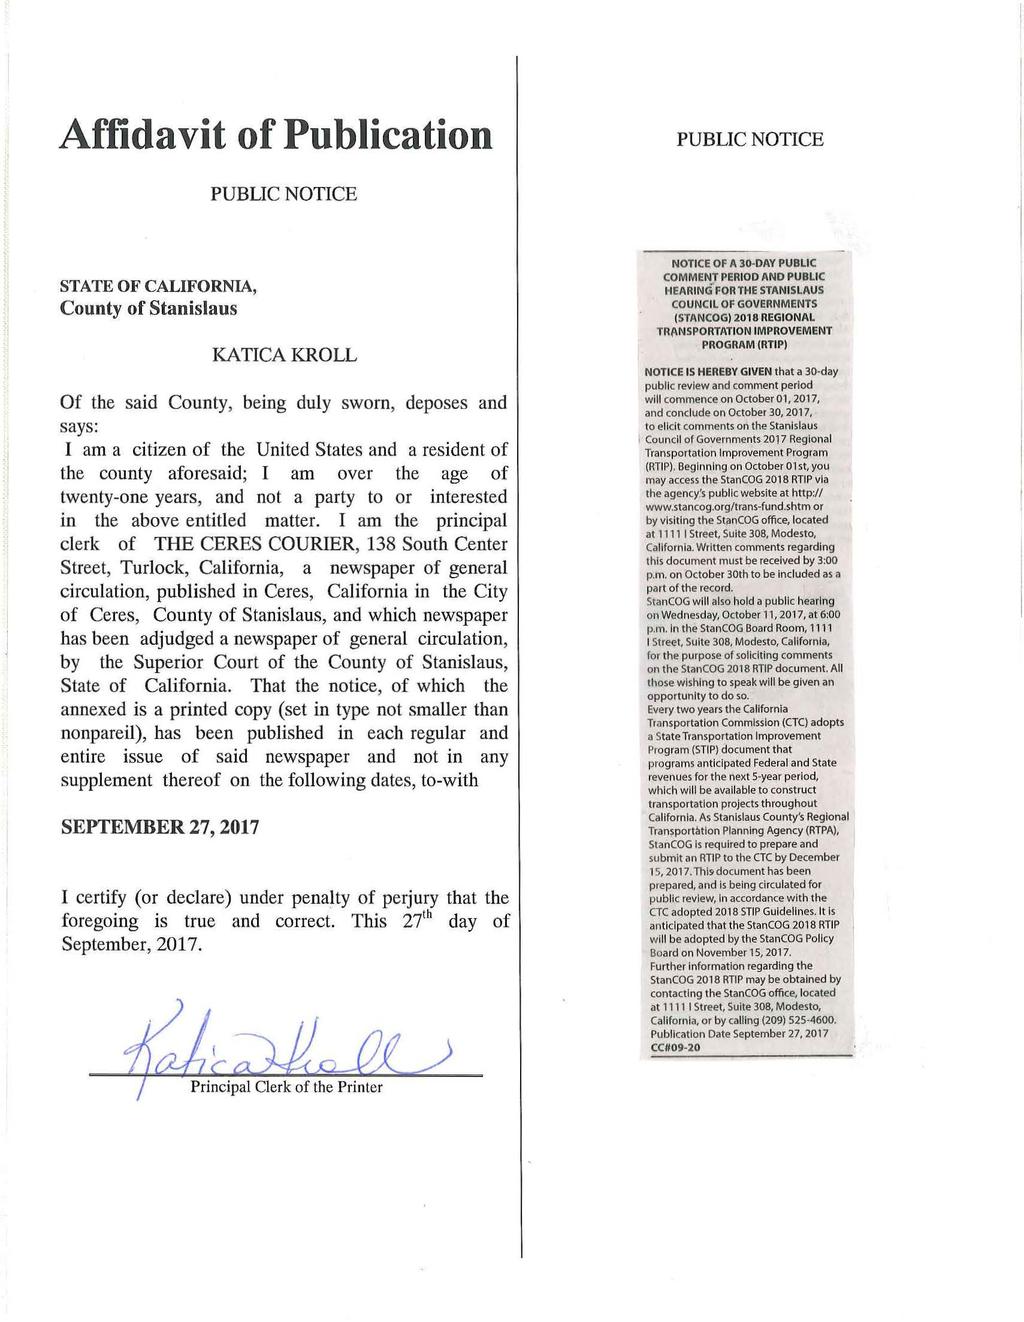 Affidavit of Publication PUBLIC NOTICE PUBLIC NOTICE STATE OF CALIFORNIA, County of Stanislaus KATICA KROLL Of the said County, being duly sworn, deposes and says: I am a citizen of the United States